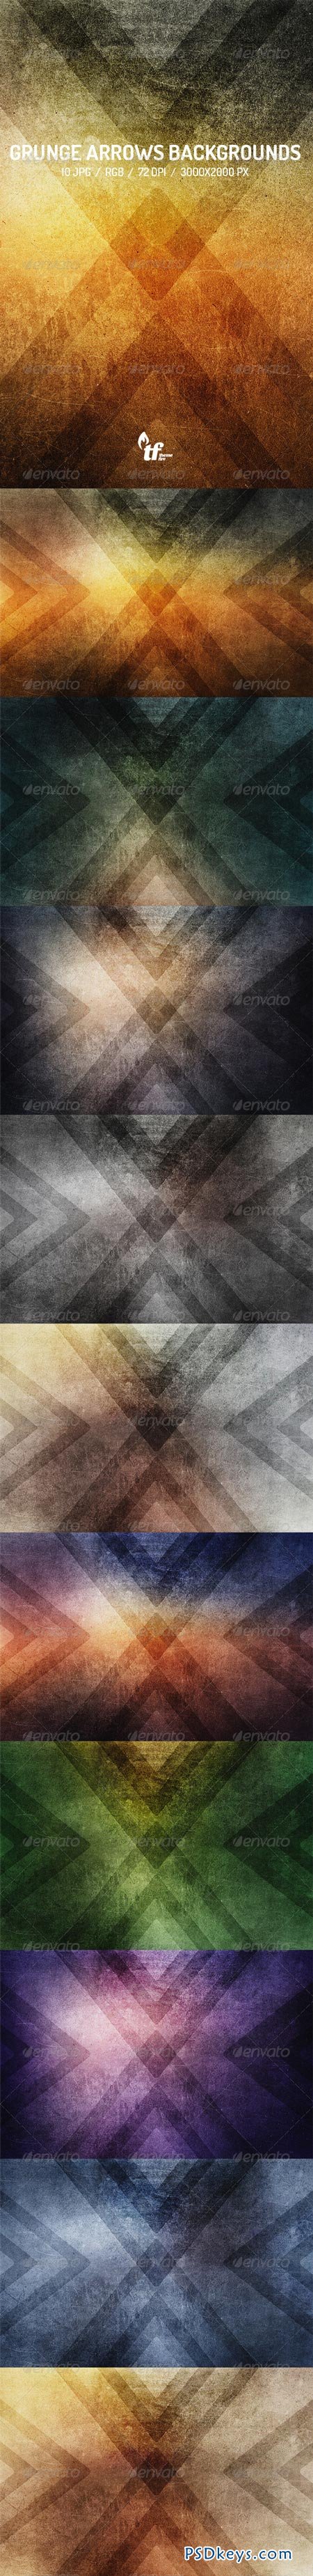 Grunge Arrows Backgrounds 7805650